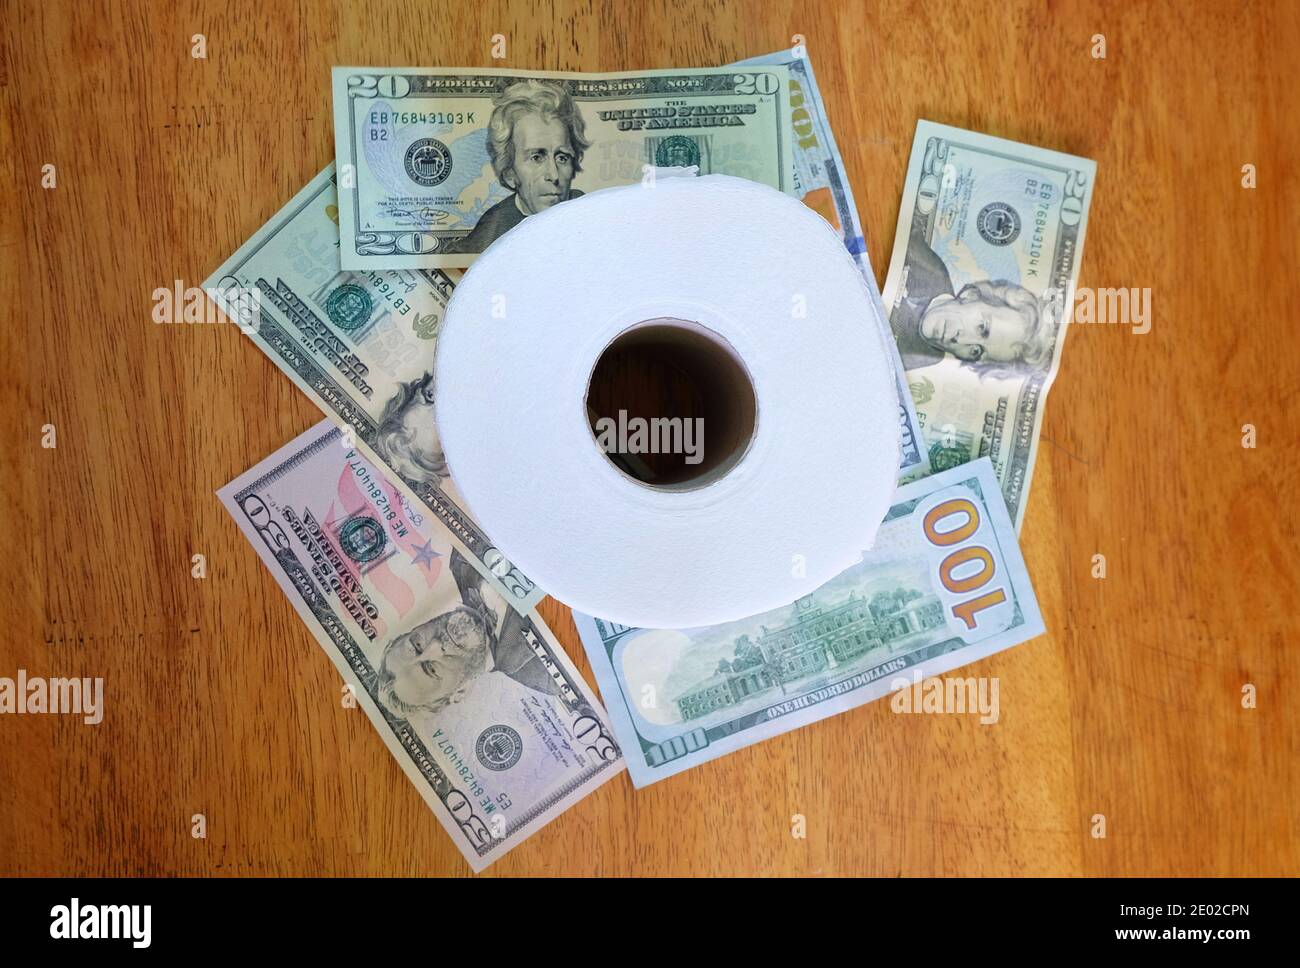 american, background, bank, banknote, bathroom, bill, business, cash, circle, clean, cleaner, covid-19, currency, dollar, epidemic, exchange, finance, Stock Photo